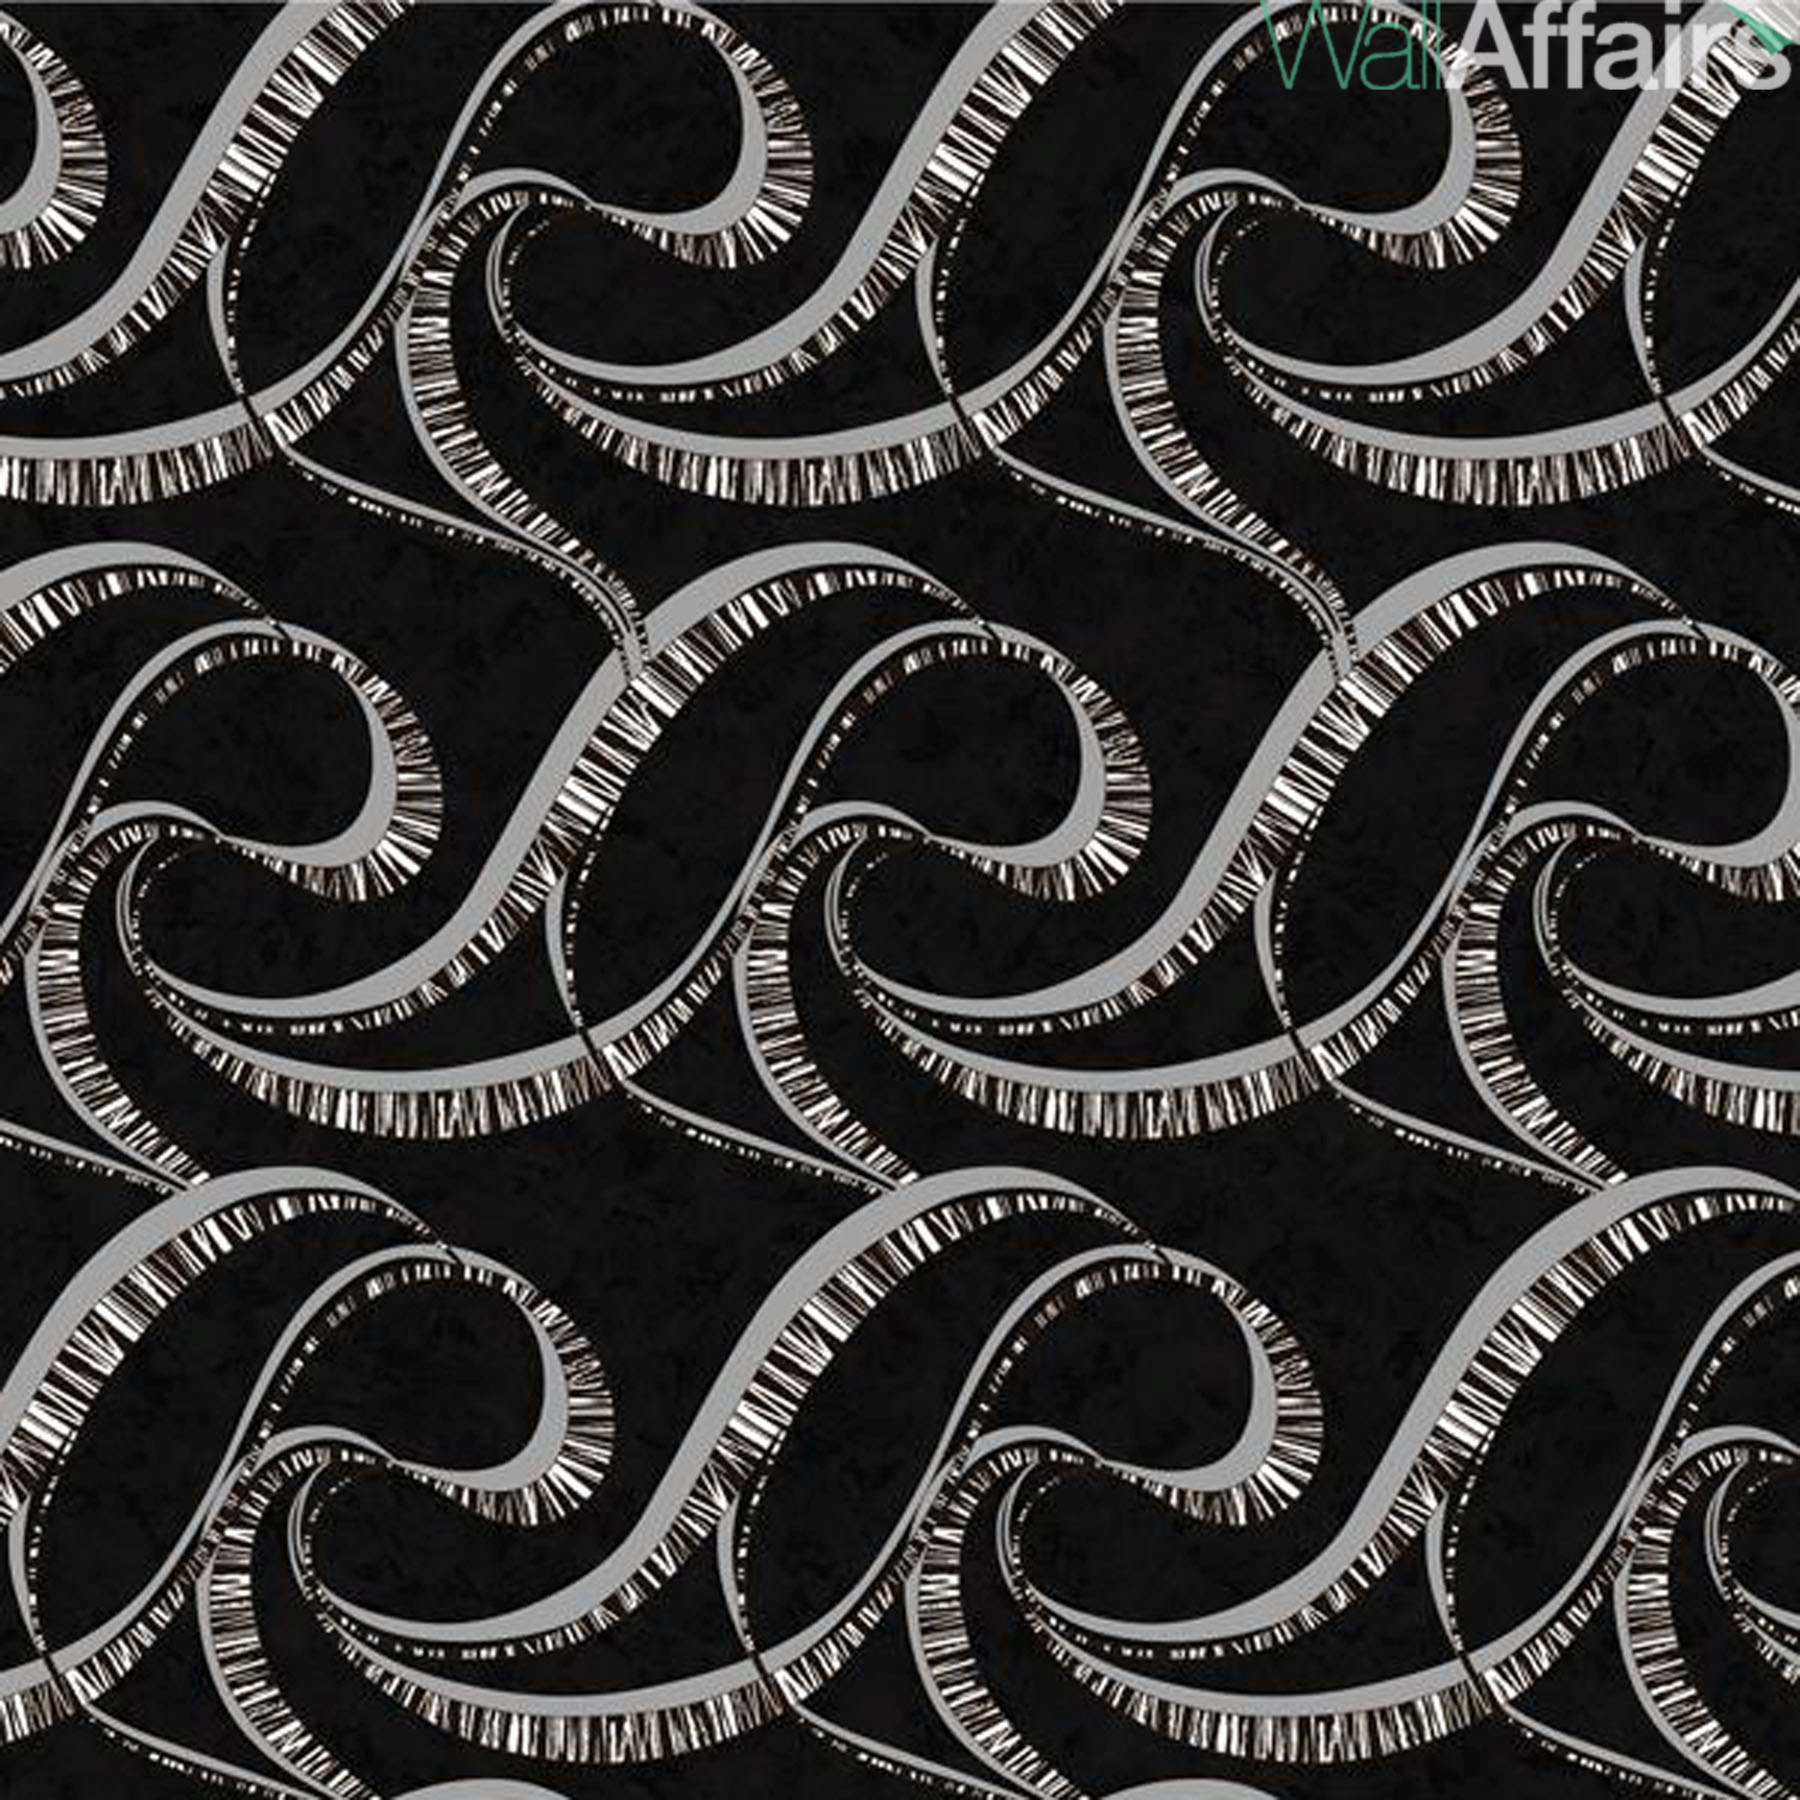 Store Supplier Wallpaper Designs In Singapore Wall Affairs